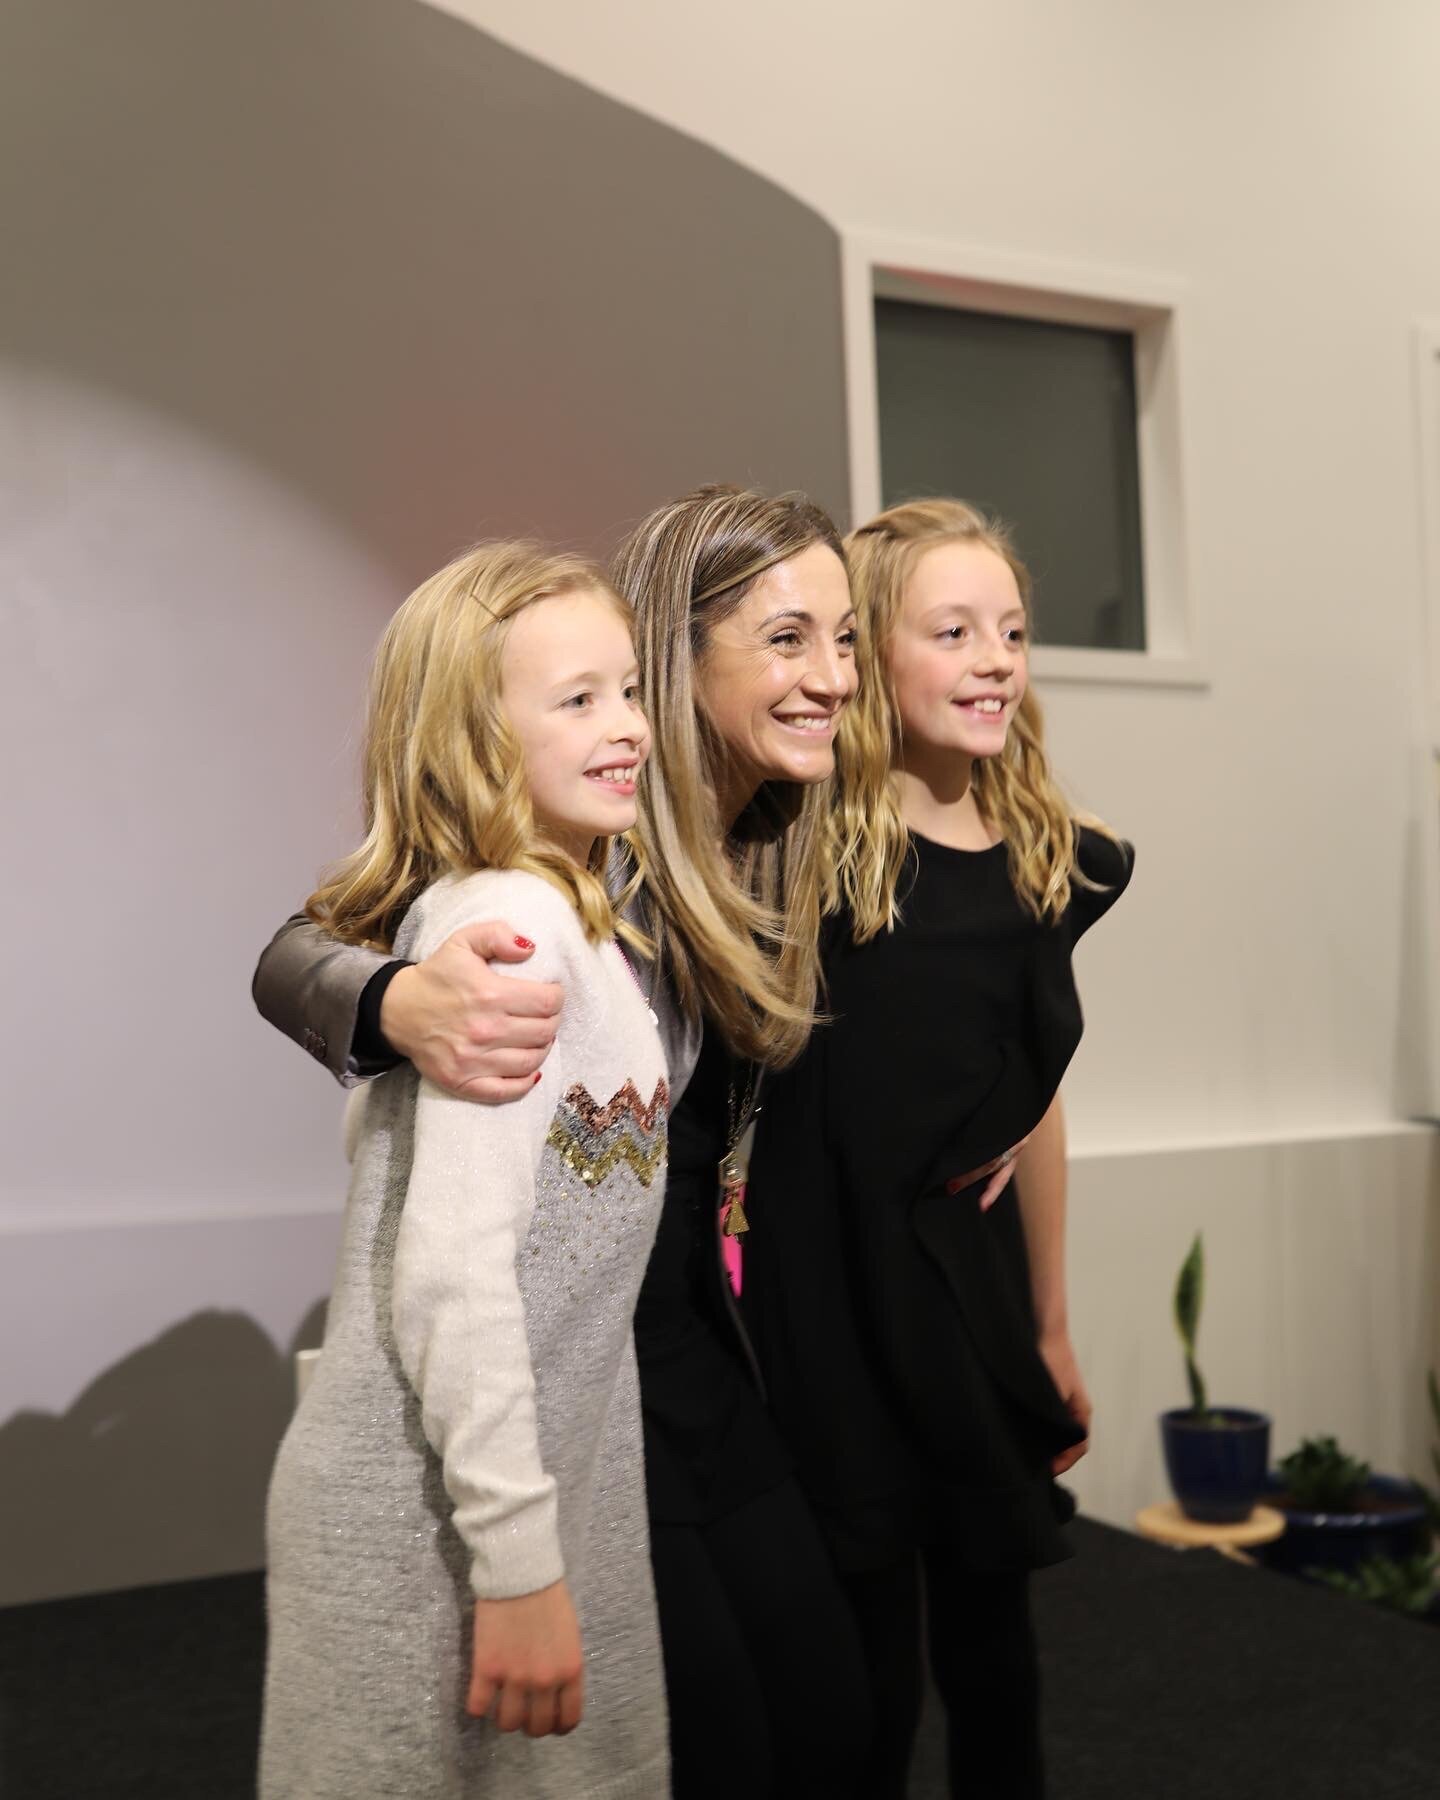 Calgary singing lessons classes for kids